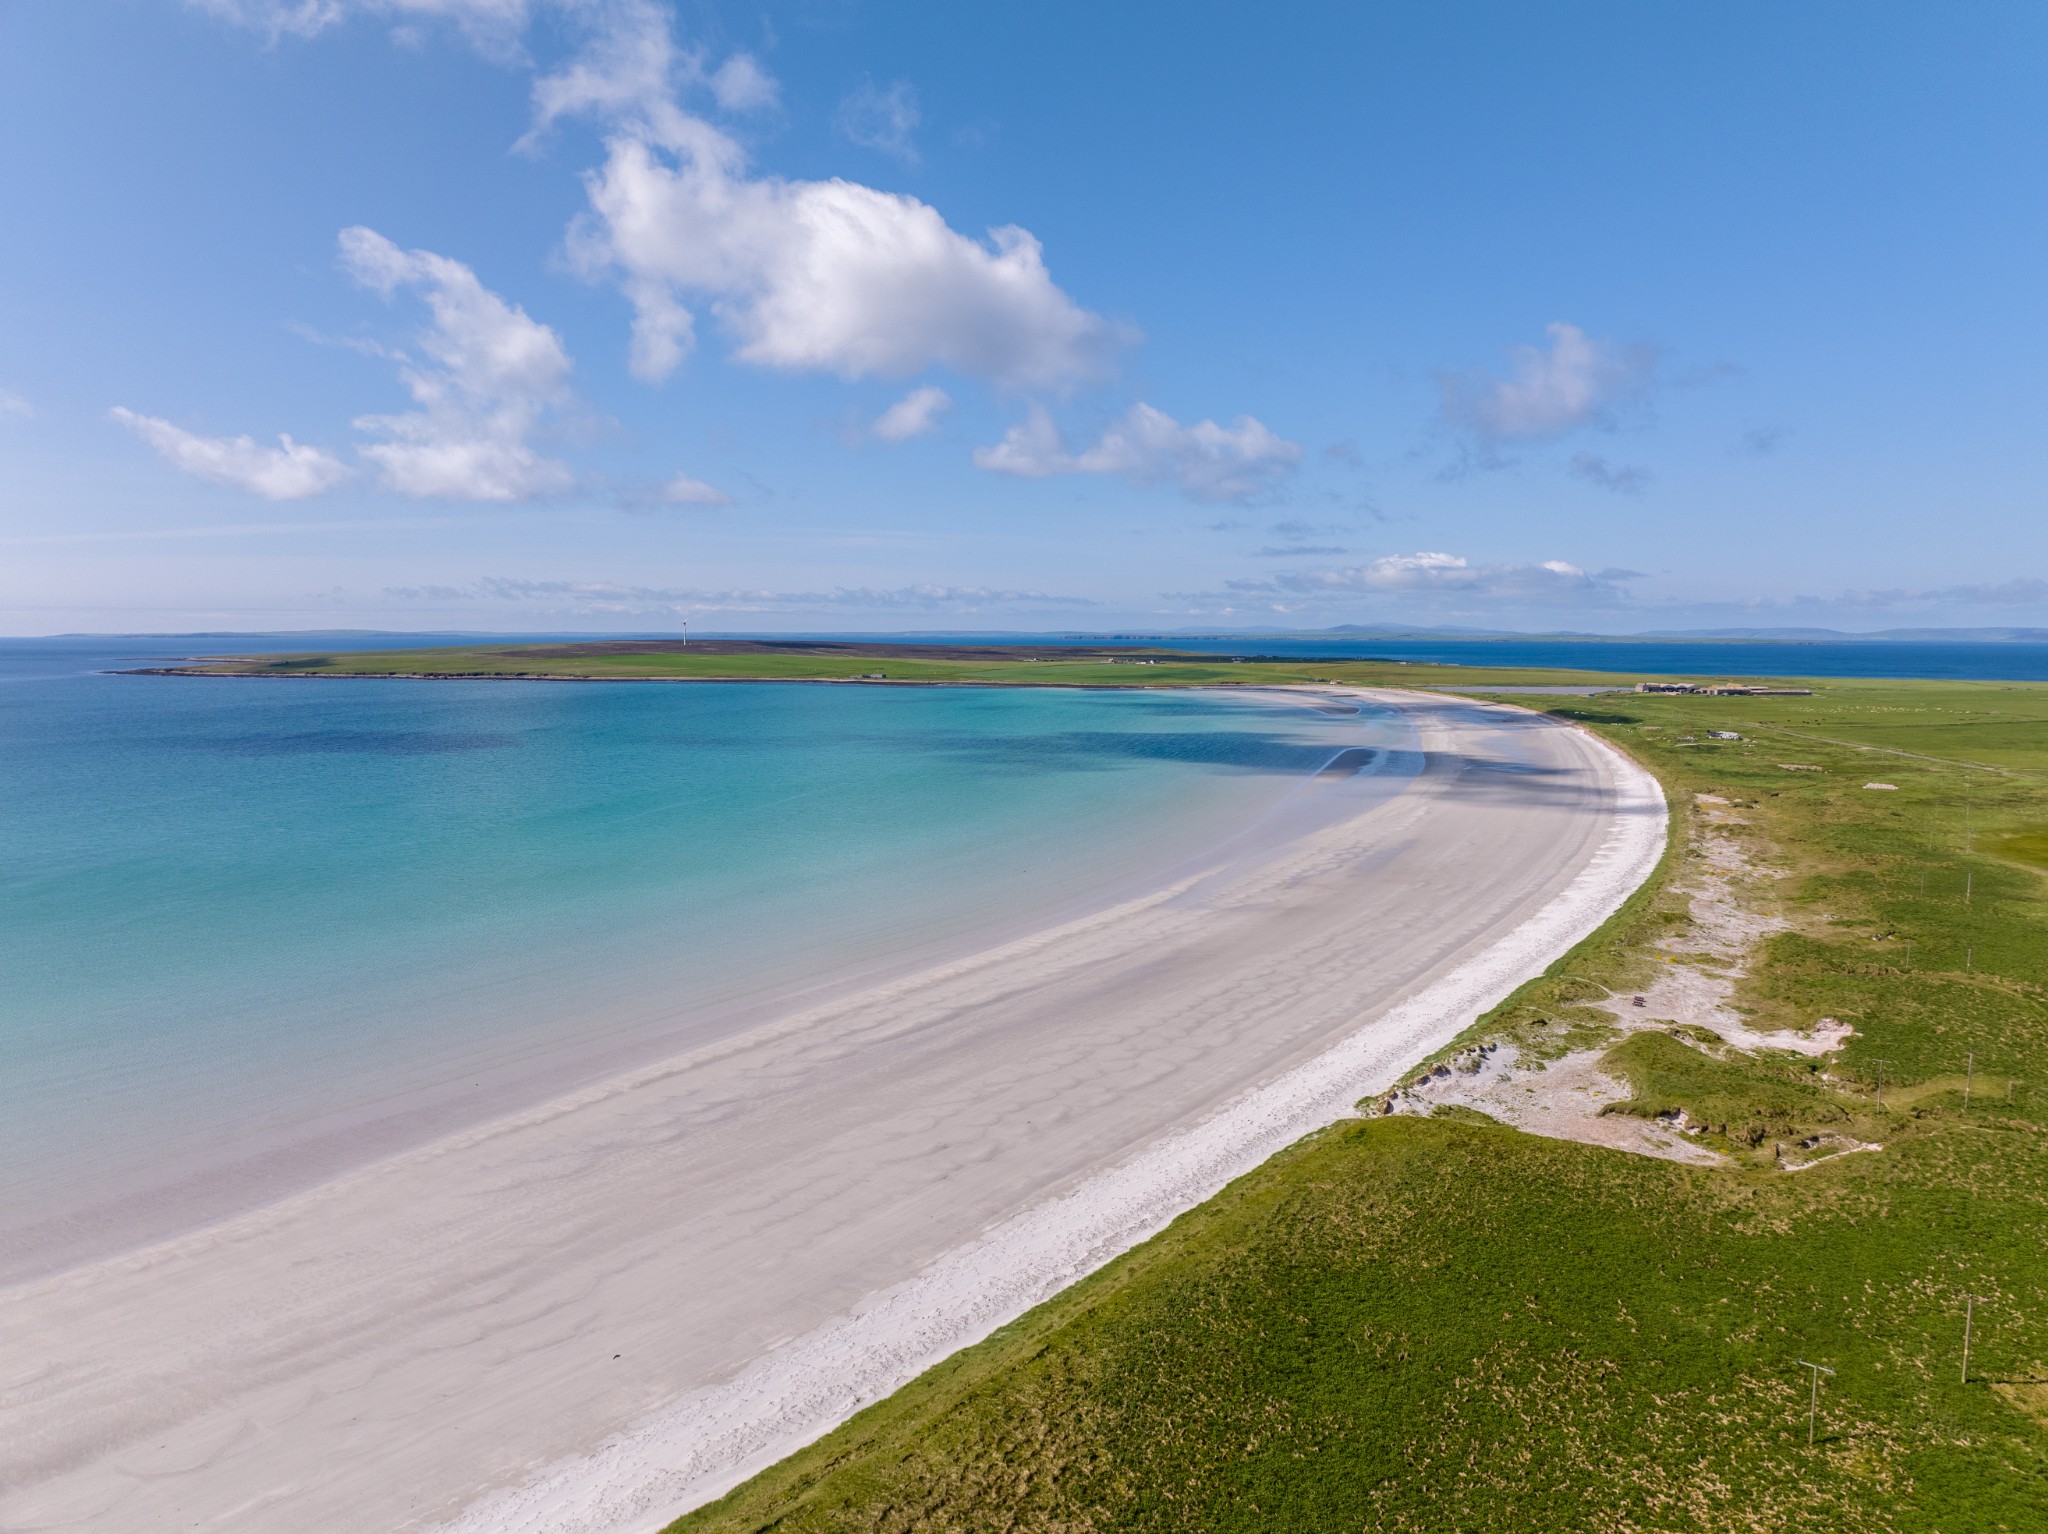 Aerial view of the beach at Rothiesholm, Stronsay